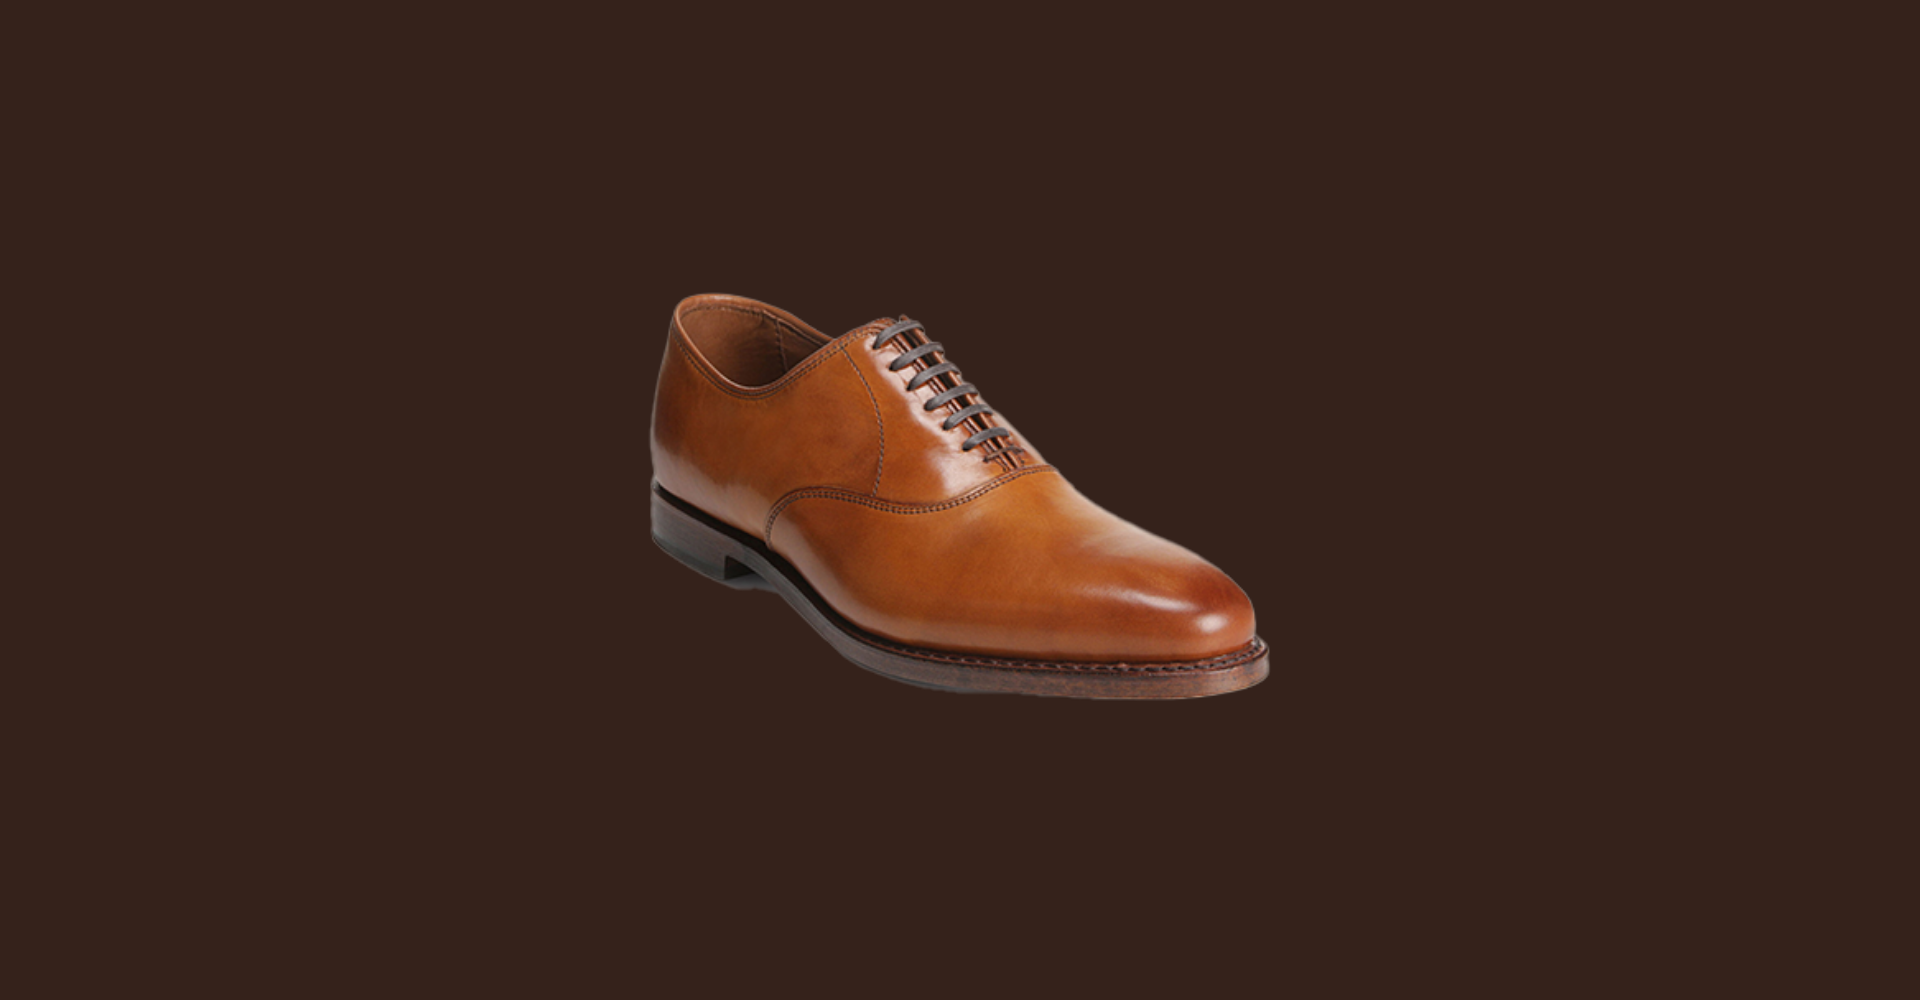 Best Men's Dress Shoes Color  Brown Vs. Black - Which To Wear When?